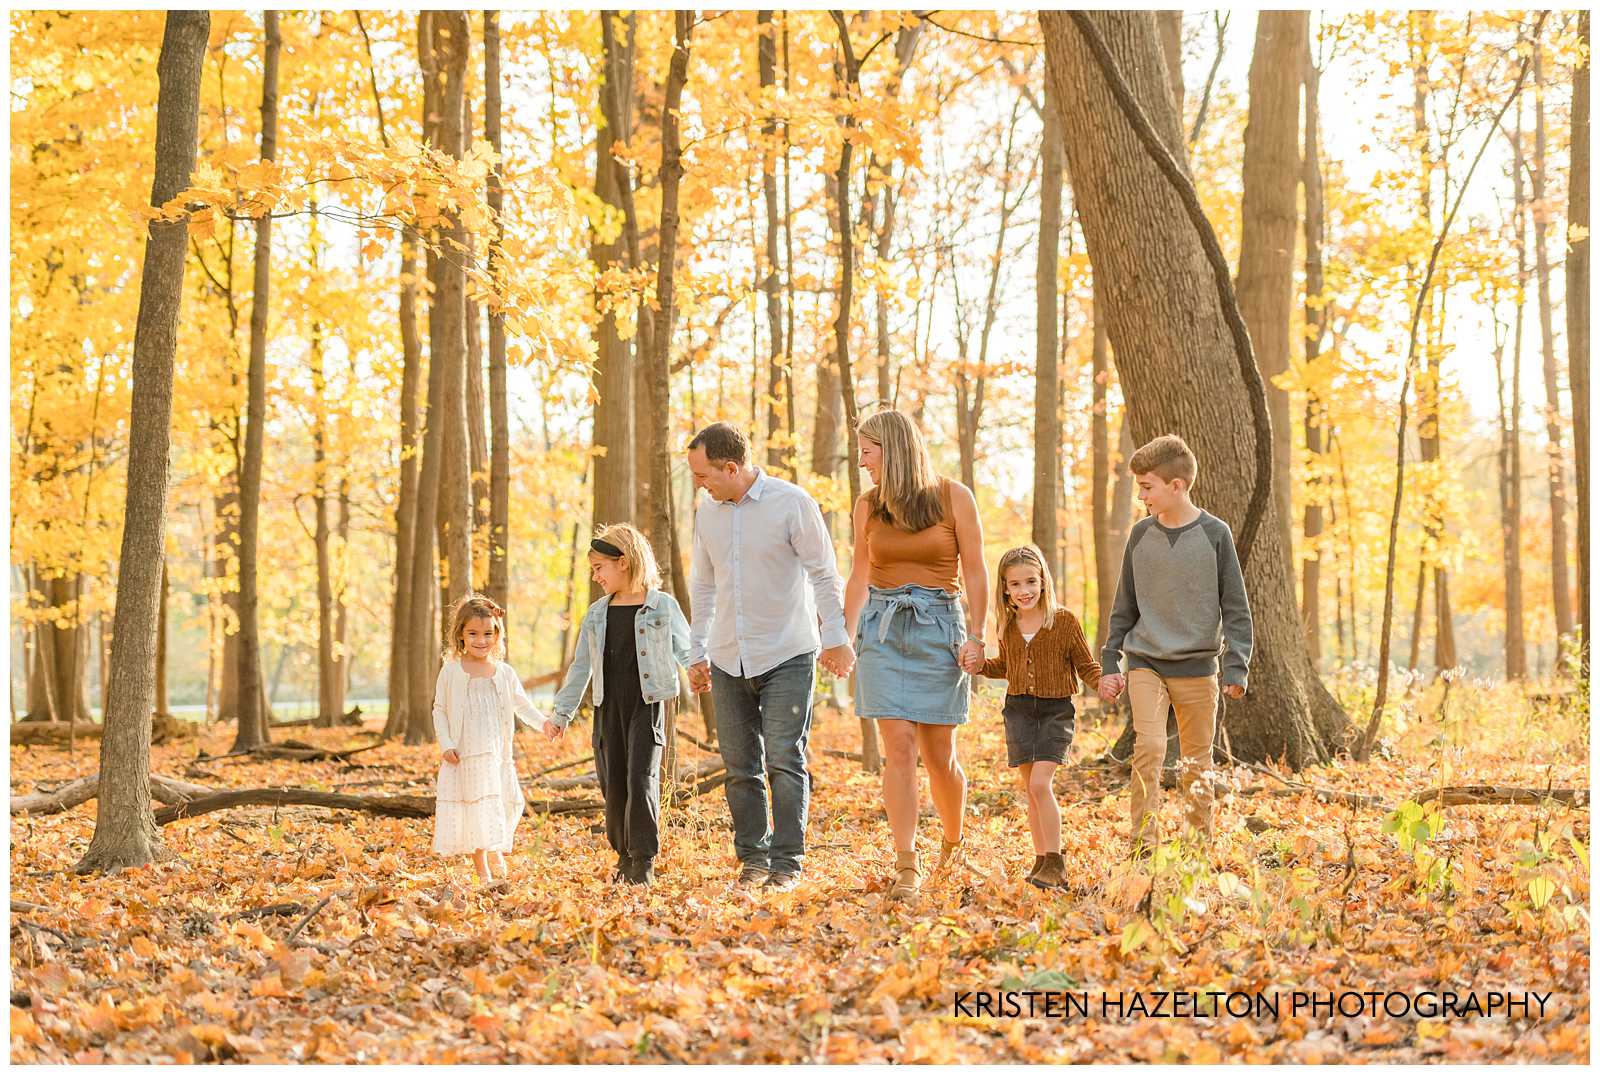 Family of six walking in the fall woods at photographer Kristen Hazelton's River Forest IL Fall Mini Sessions